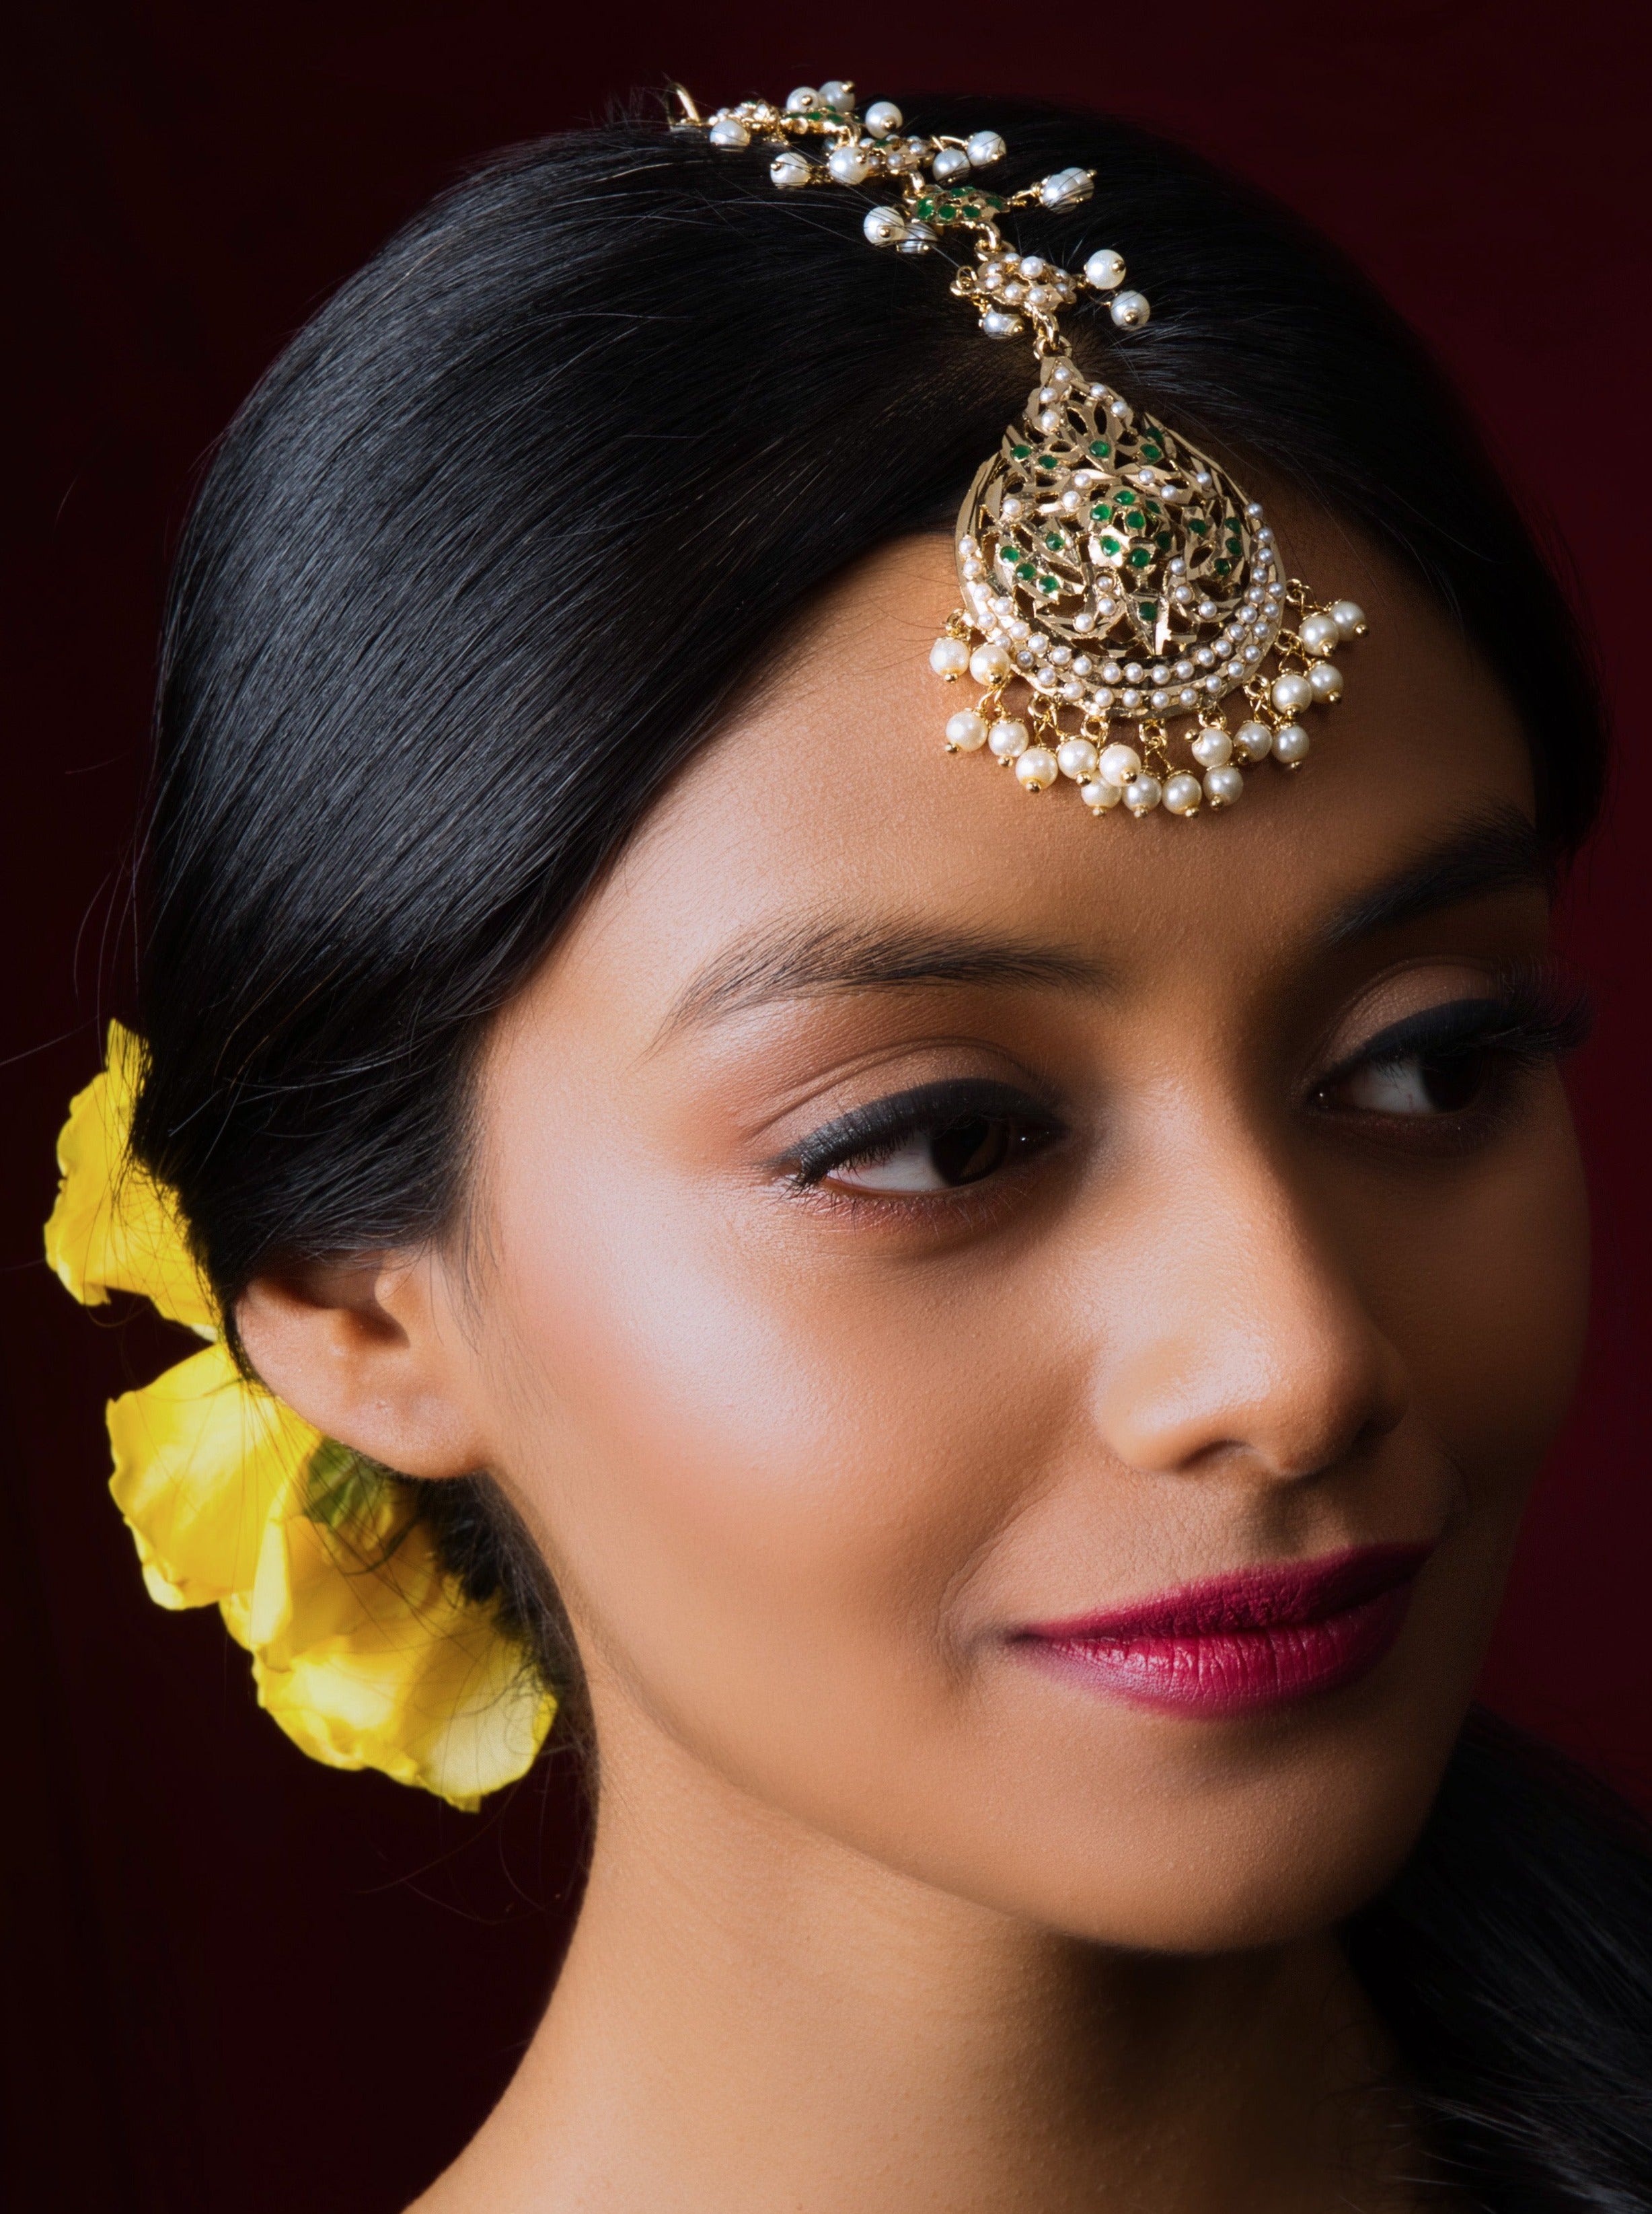 Green Dropchain Tikka: Artisanal elegance for ceremonial occasions or bridal flair.